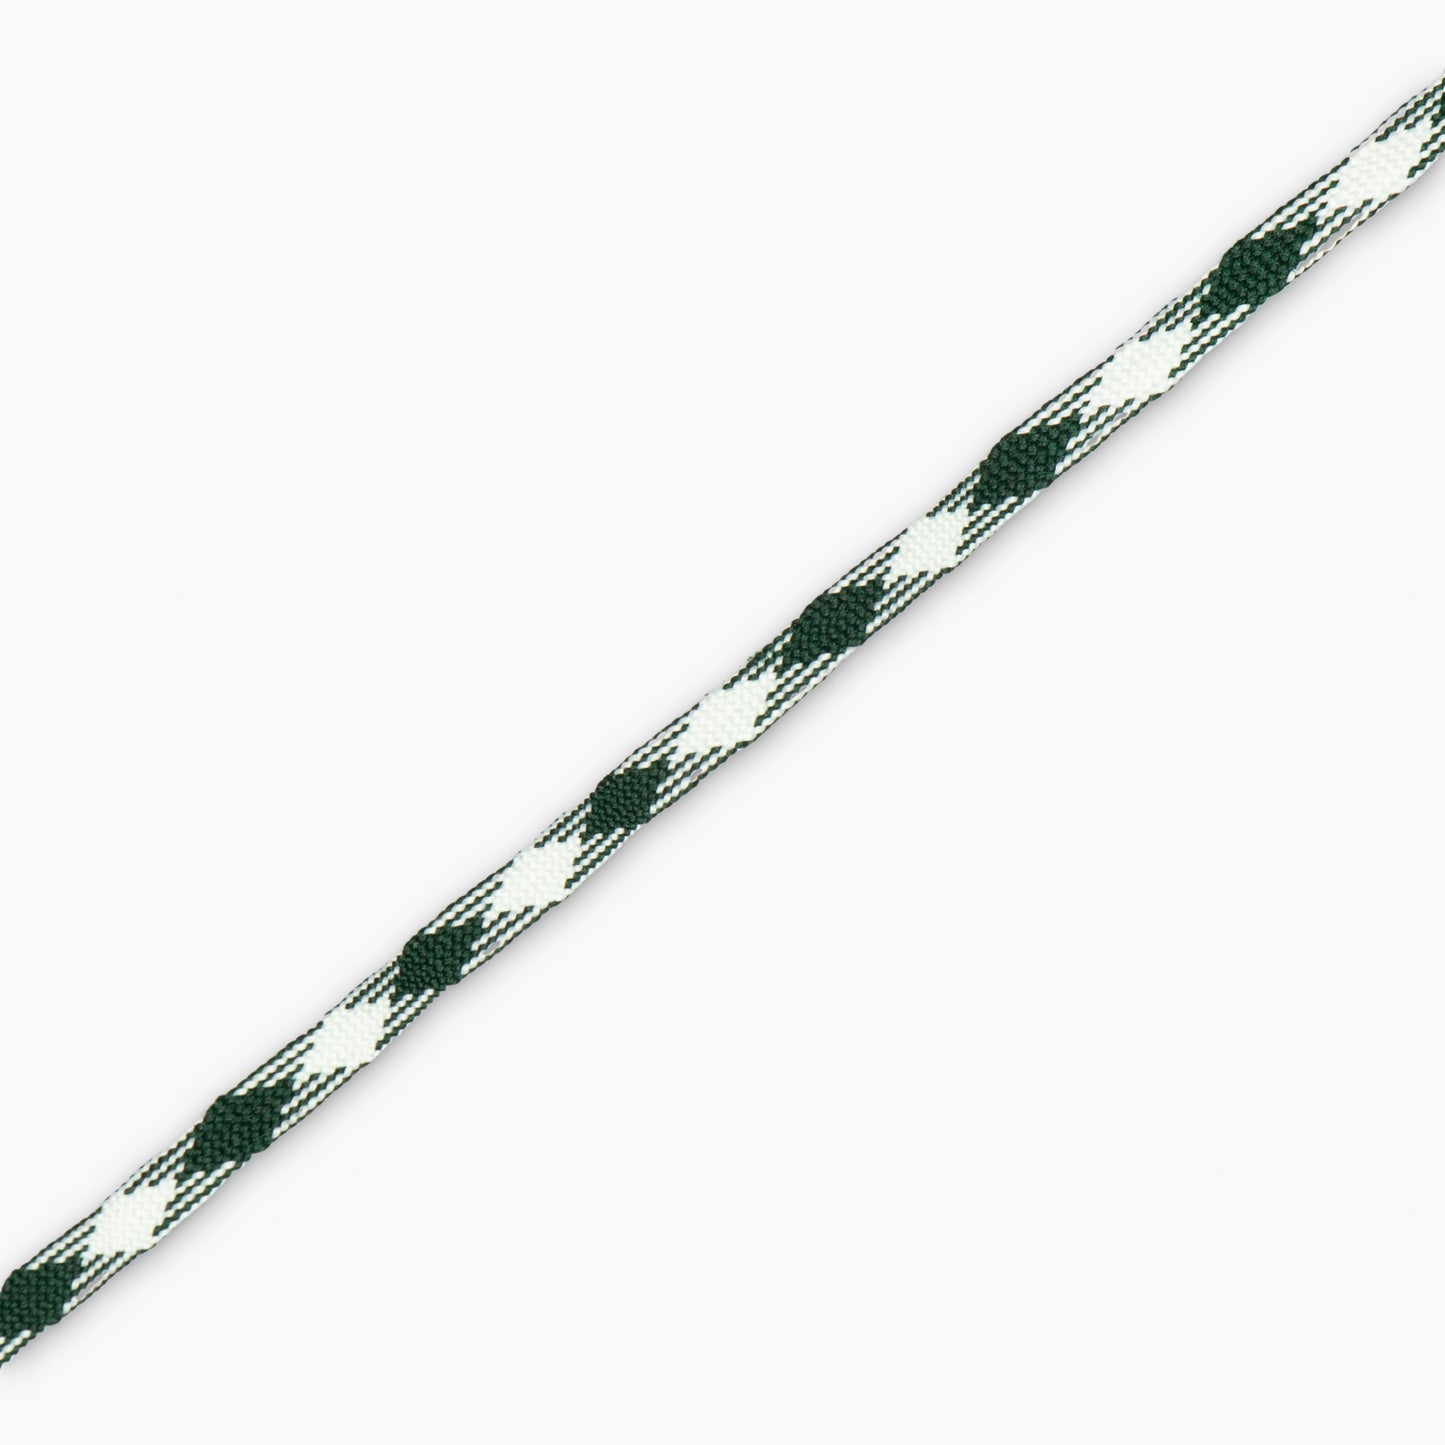 Shoe Lace 5mm Checkered Green & White (25met)